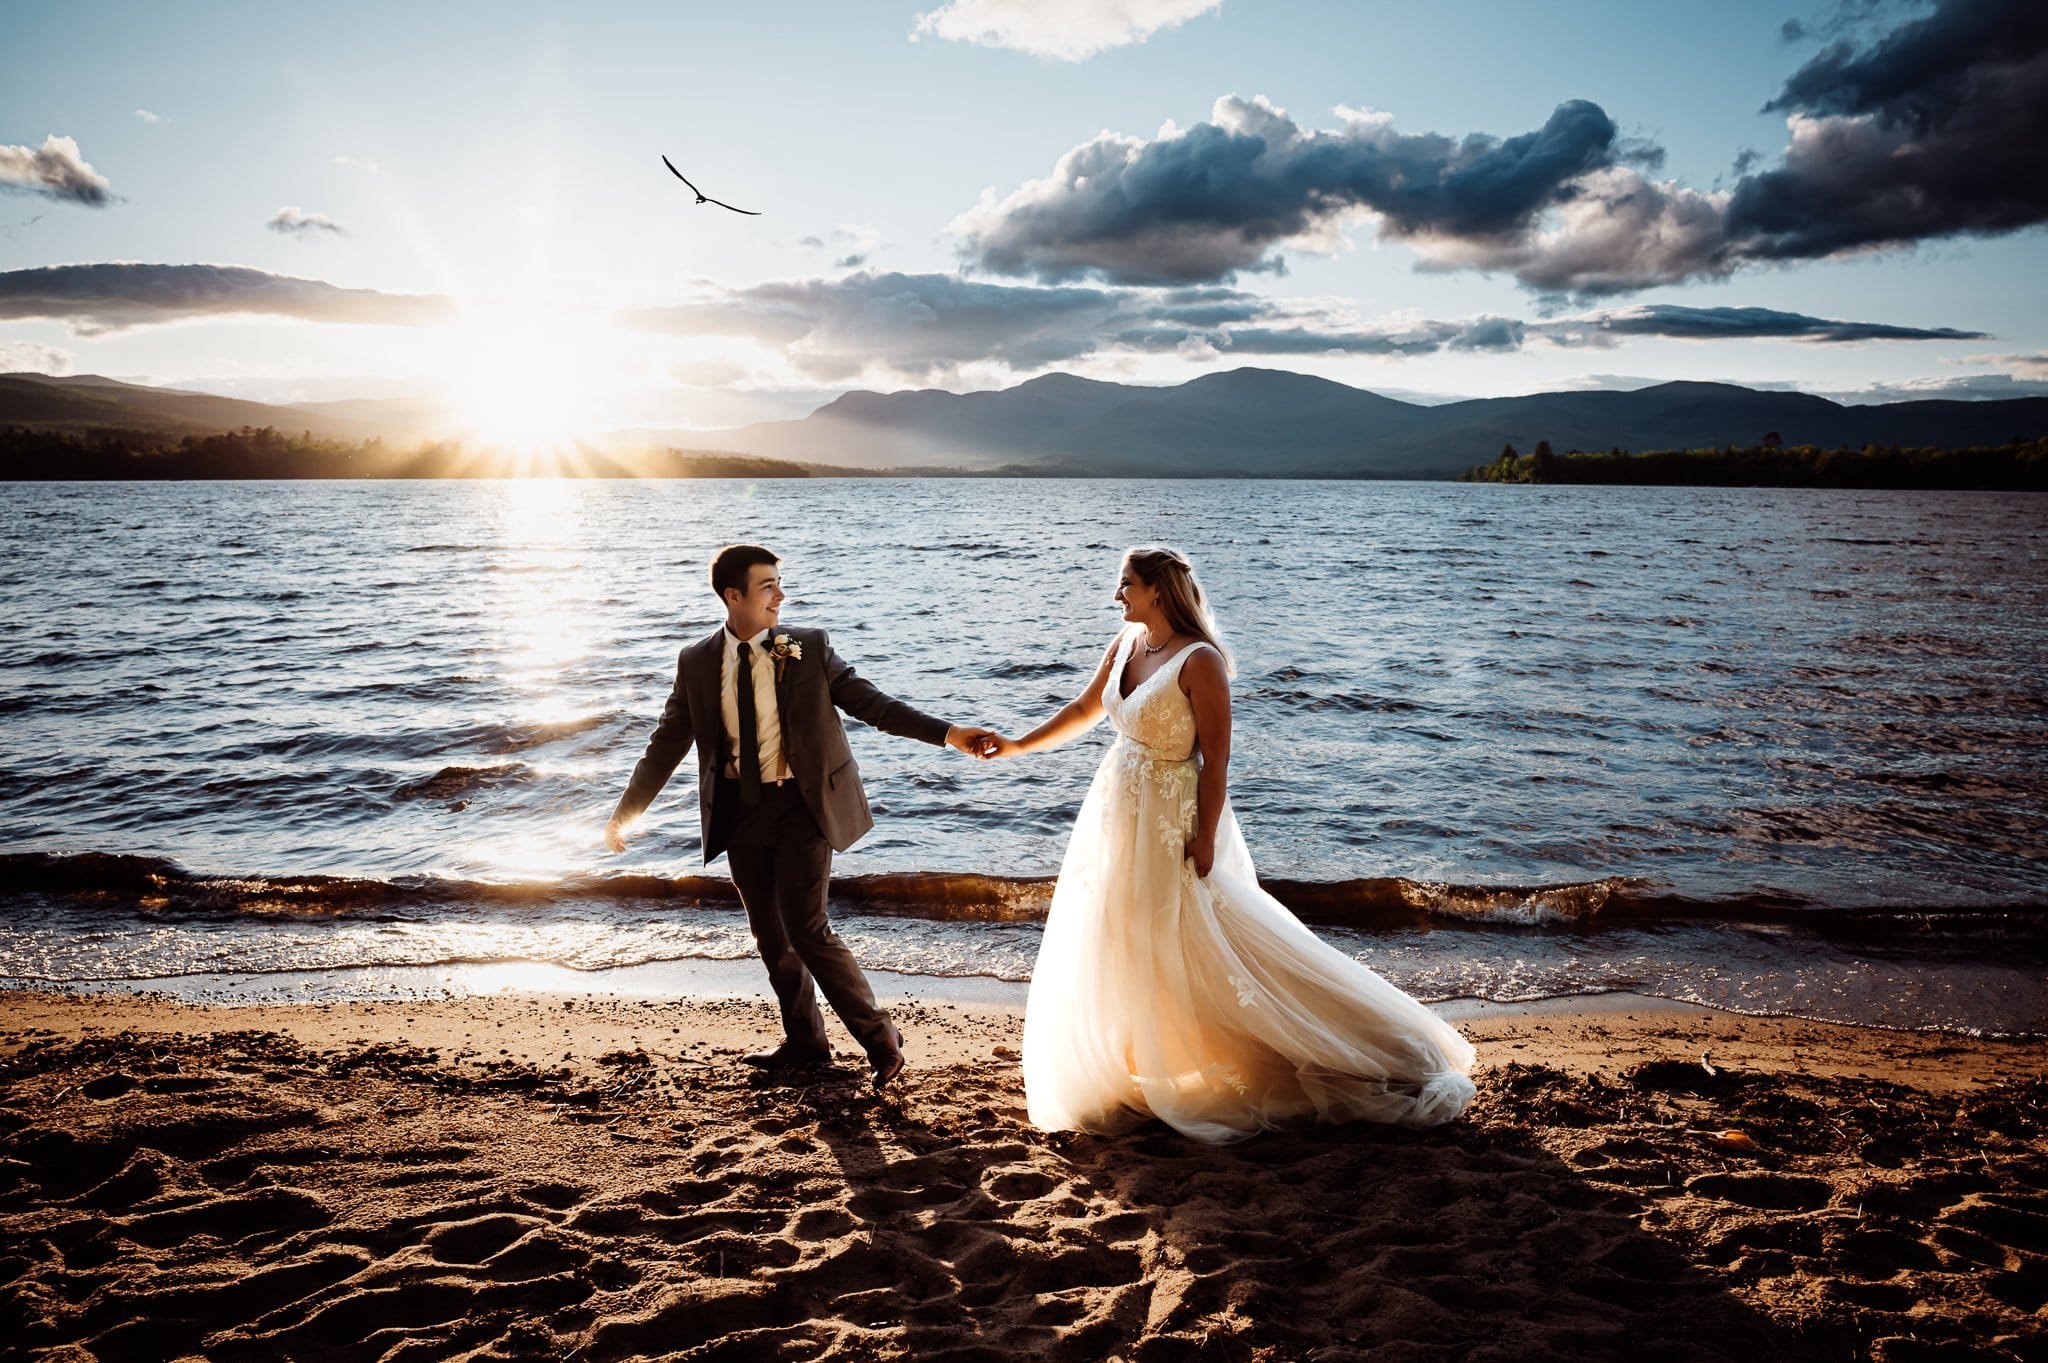 Bride and groom walking together in front of lake at sunset time